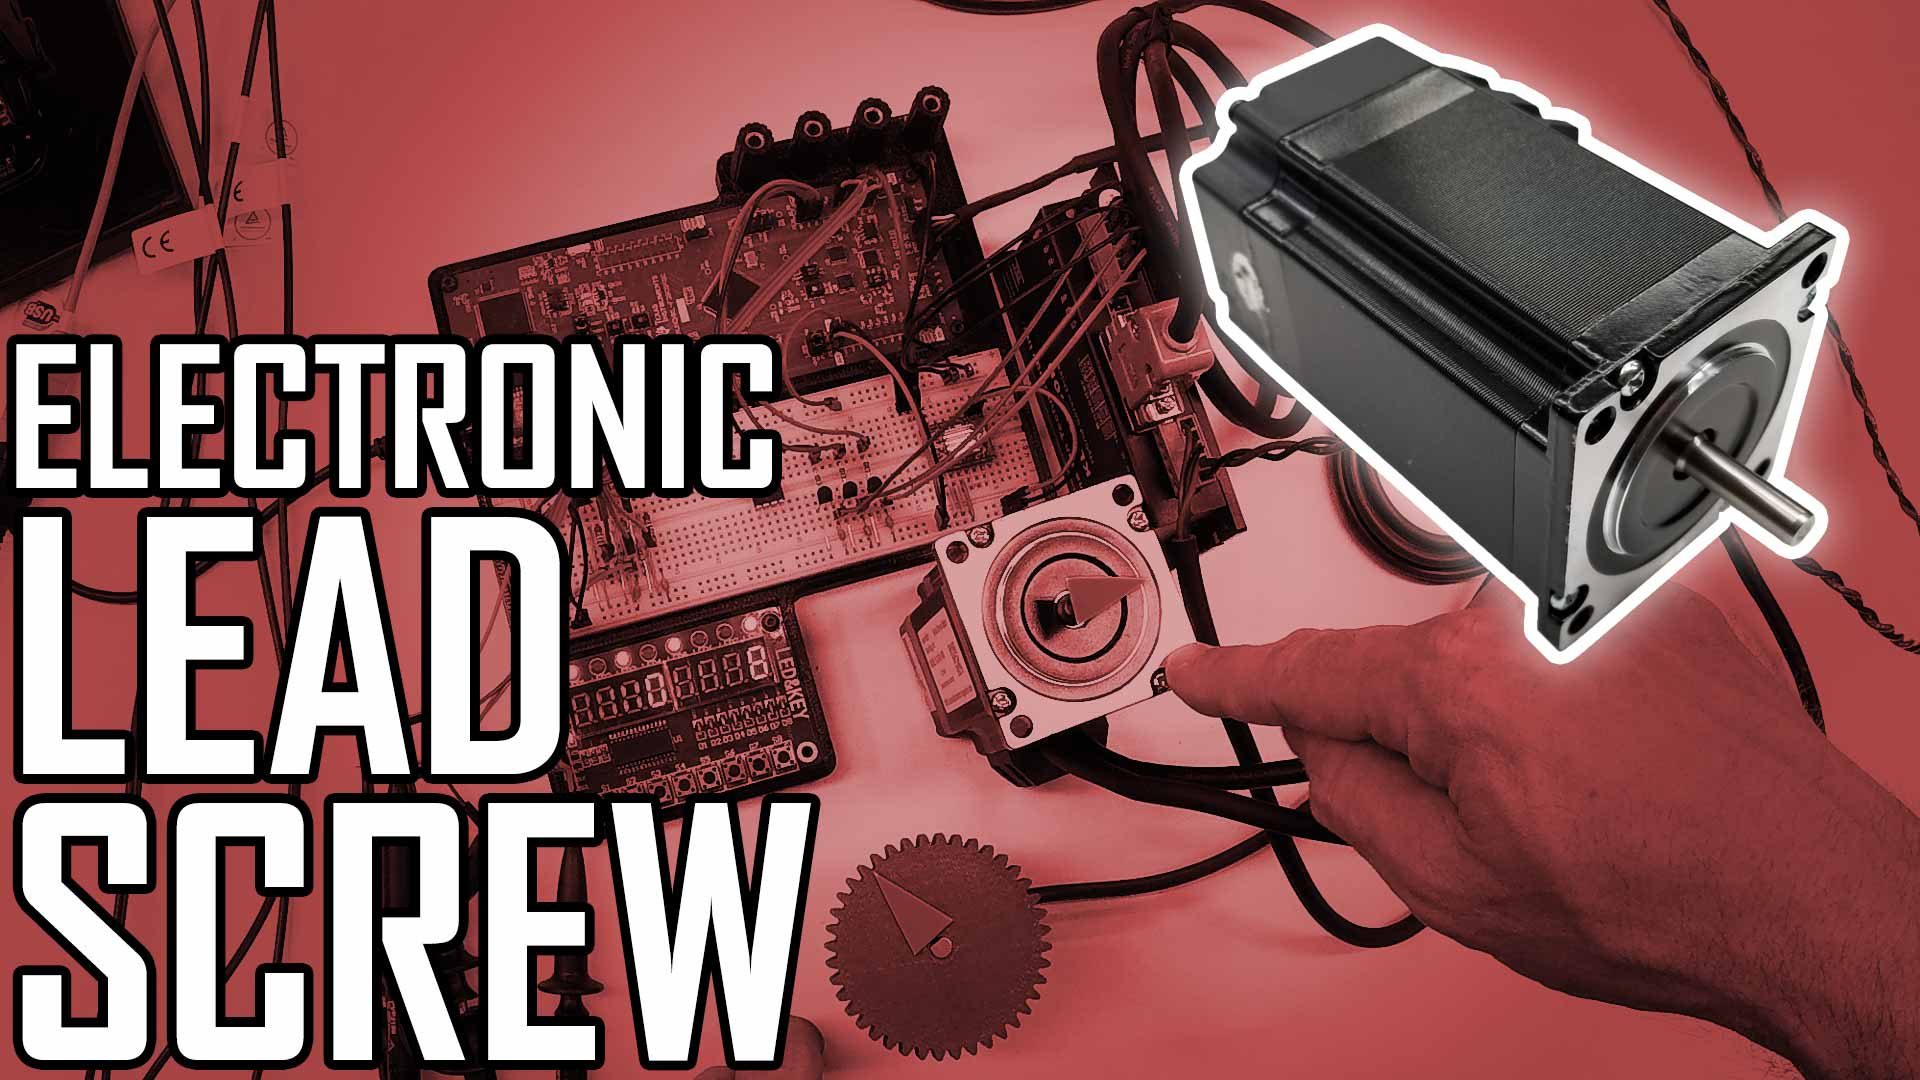 Lathe Electronic Leadscrew Part 4: Steppers and Servos and Drives (Oh My!)